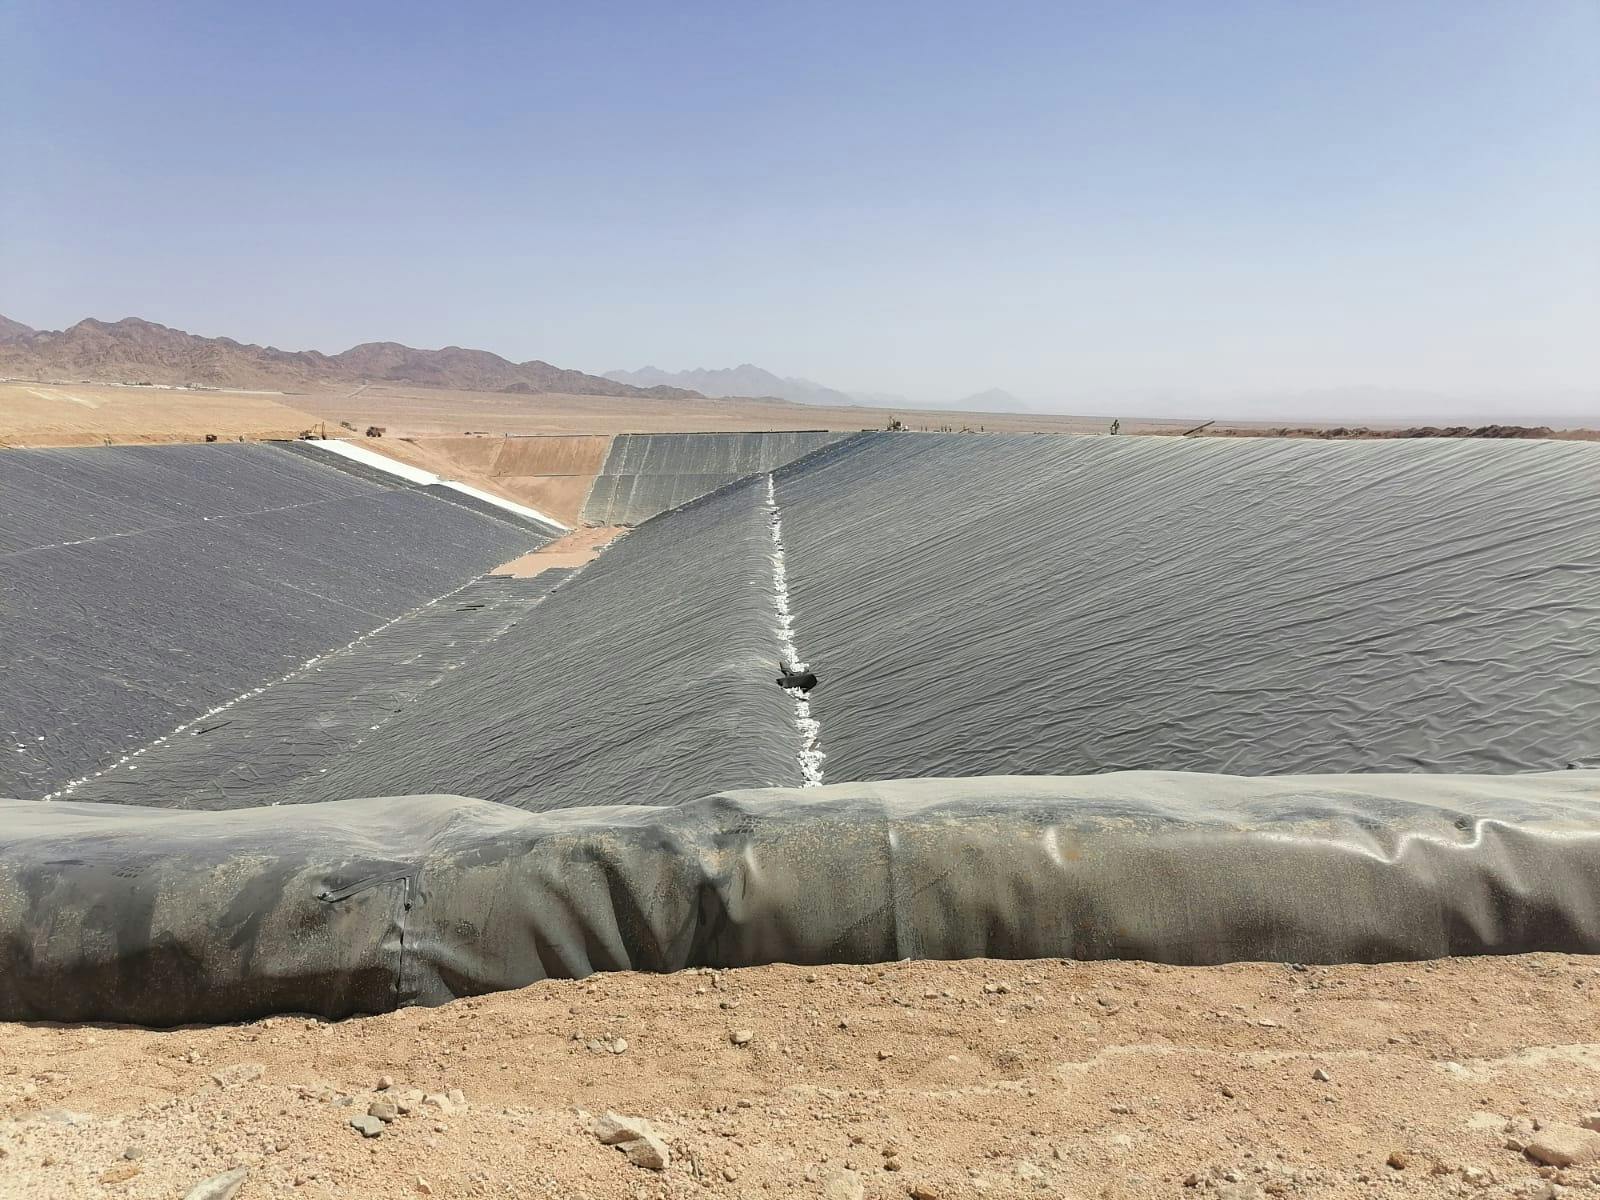 Solmax's innovative liners met client's requirements, protecting environment and communities from pollution and facilitating safe wastewater removal.